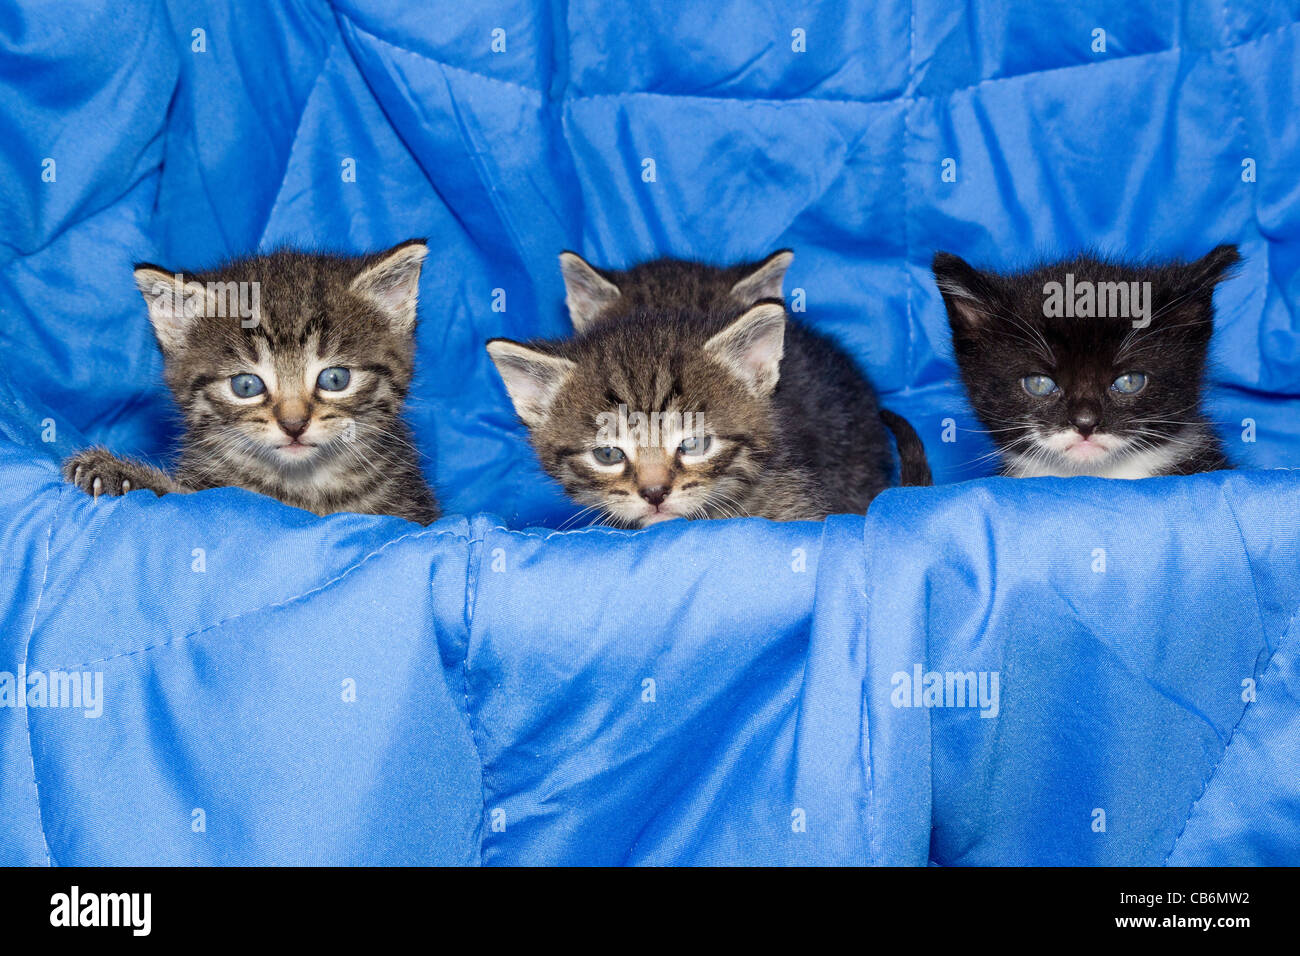 Kittens, four babies sitting together, Lower Saxony, Germany Stock Photo